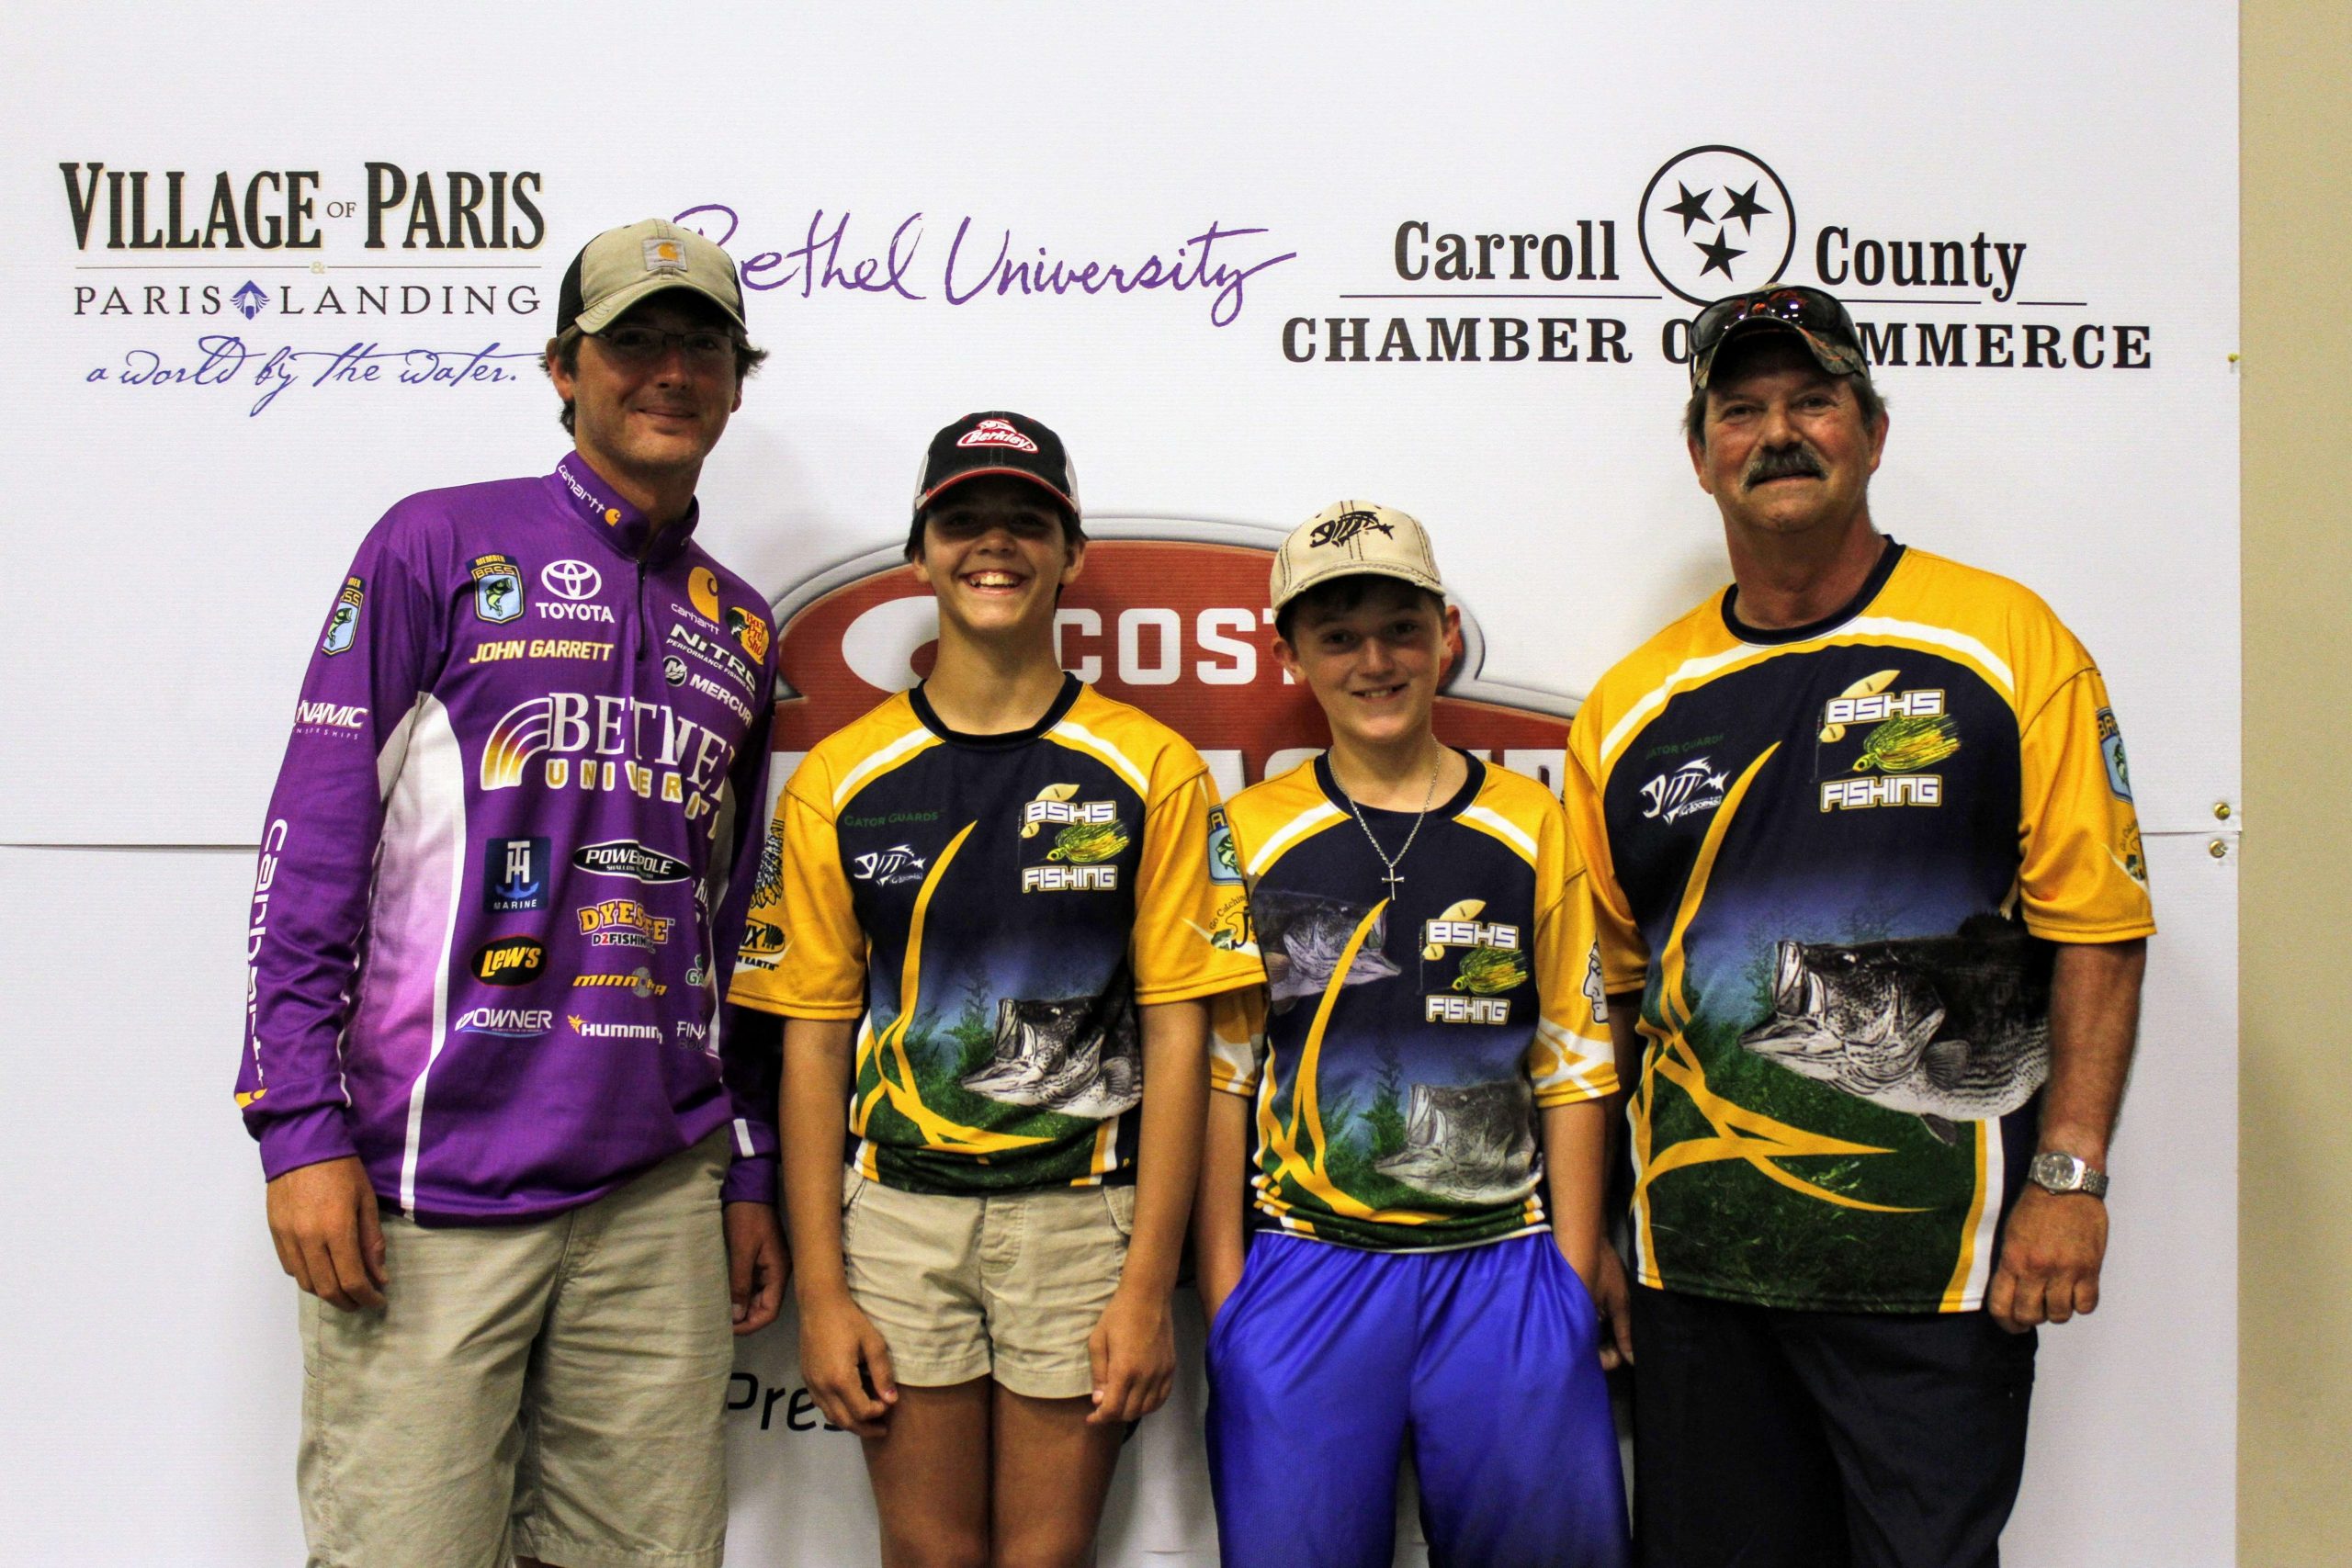 West Virginia's Riley Albanese and Destiny Parcell are two of the young anglers participating in the Costa Bassmaster Junior National Championship presented by DICK's Sporting Goods on on 1,000 Acre Recreation Lake in Huntingdon, Tenn. The teams met for registration and more at Bethel University in nearby Lexington, Tenn. on June 19, and the two-day tournament will be held June 20-21. In all, 50 two-person teams (and one solo angler) from around the U.S. and Canada are participating in the tournament. Bethel angler John Garrett is pictured in each of the photos in this gallery. Garrett grew up in Union City, Tenn. and won the Carhartt College Classic Bracket on Kentucky Lake in 2016.